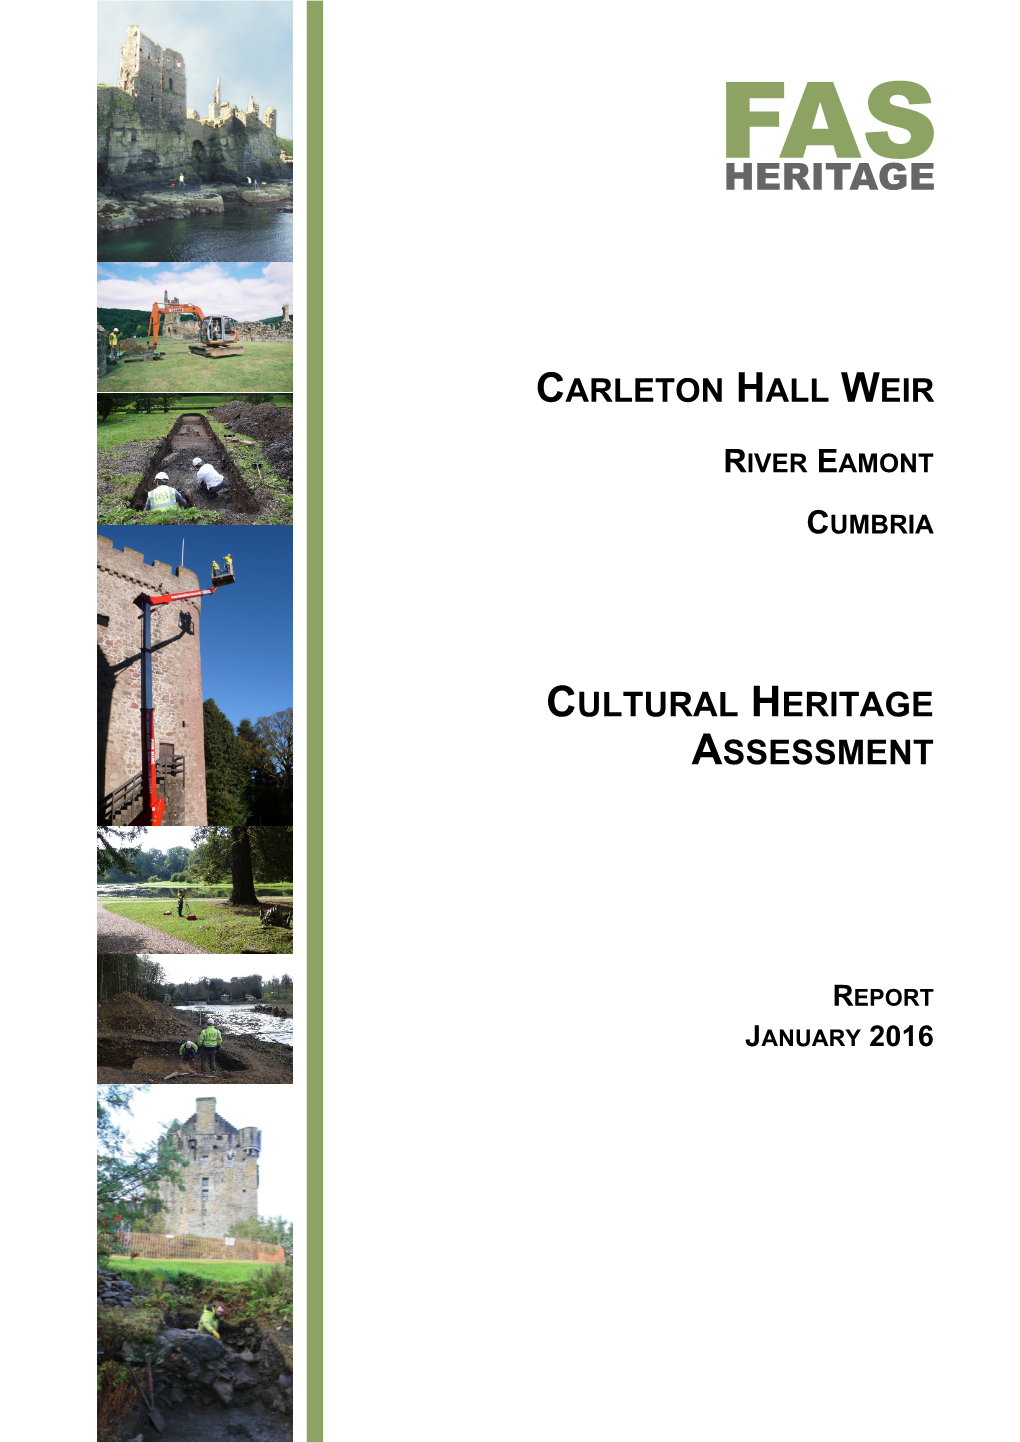 Carlton Hall Weir Cultural Heritage Assessment Report